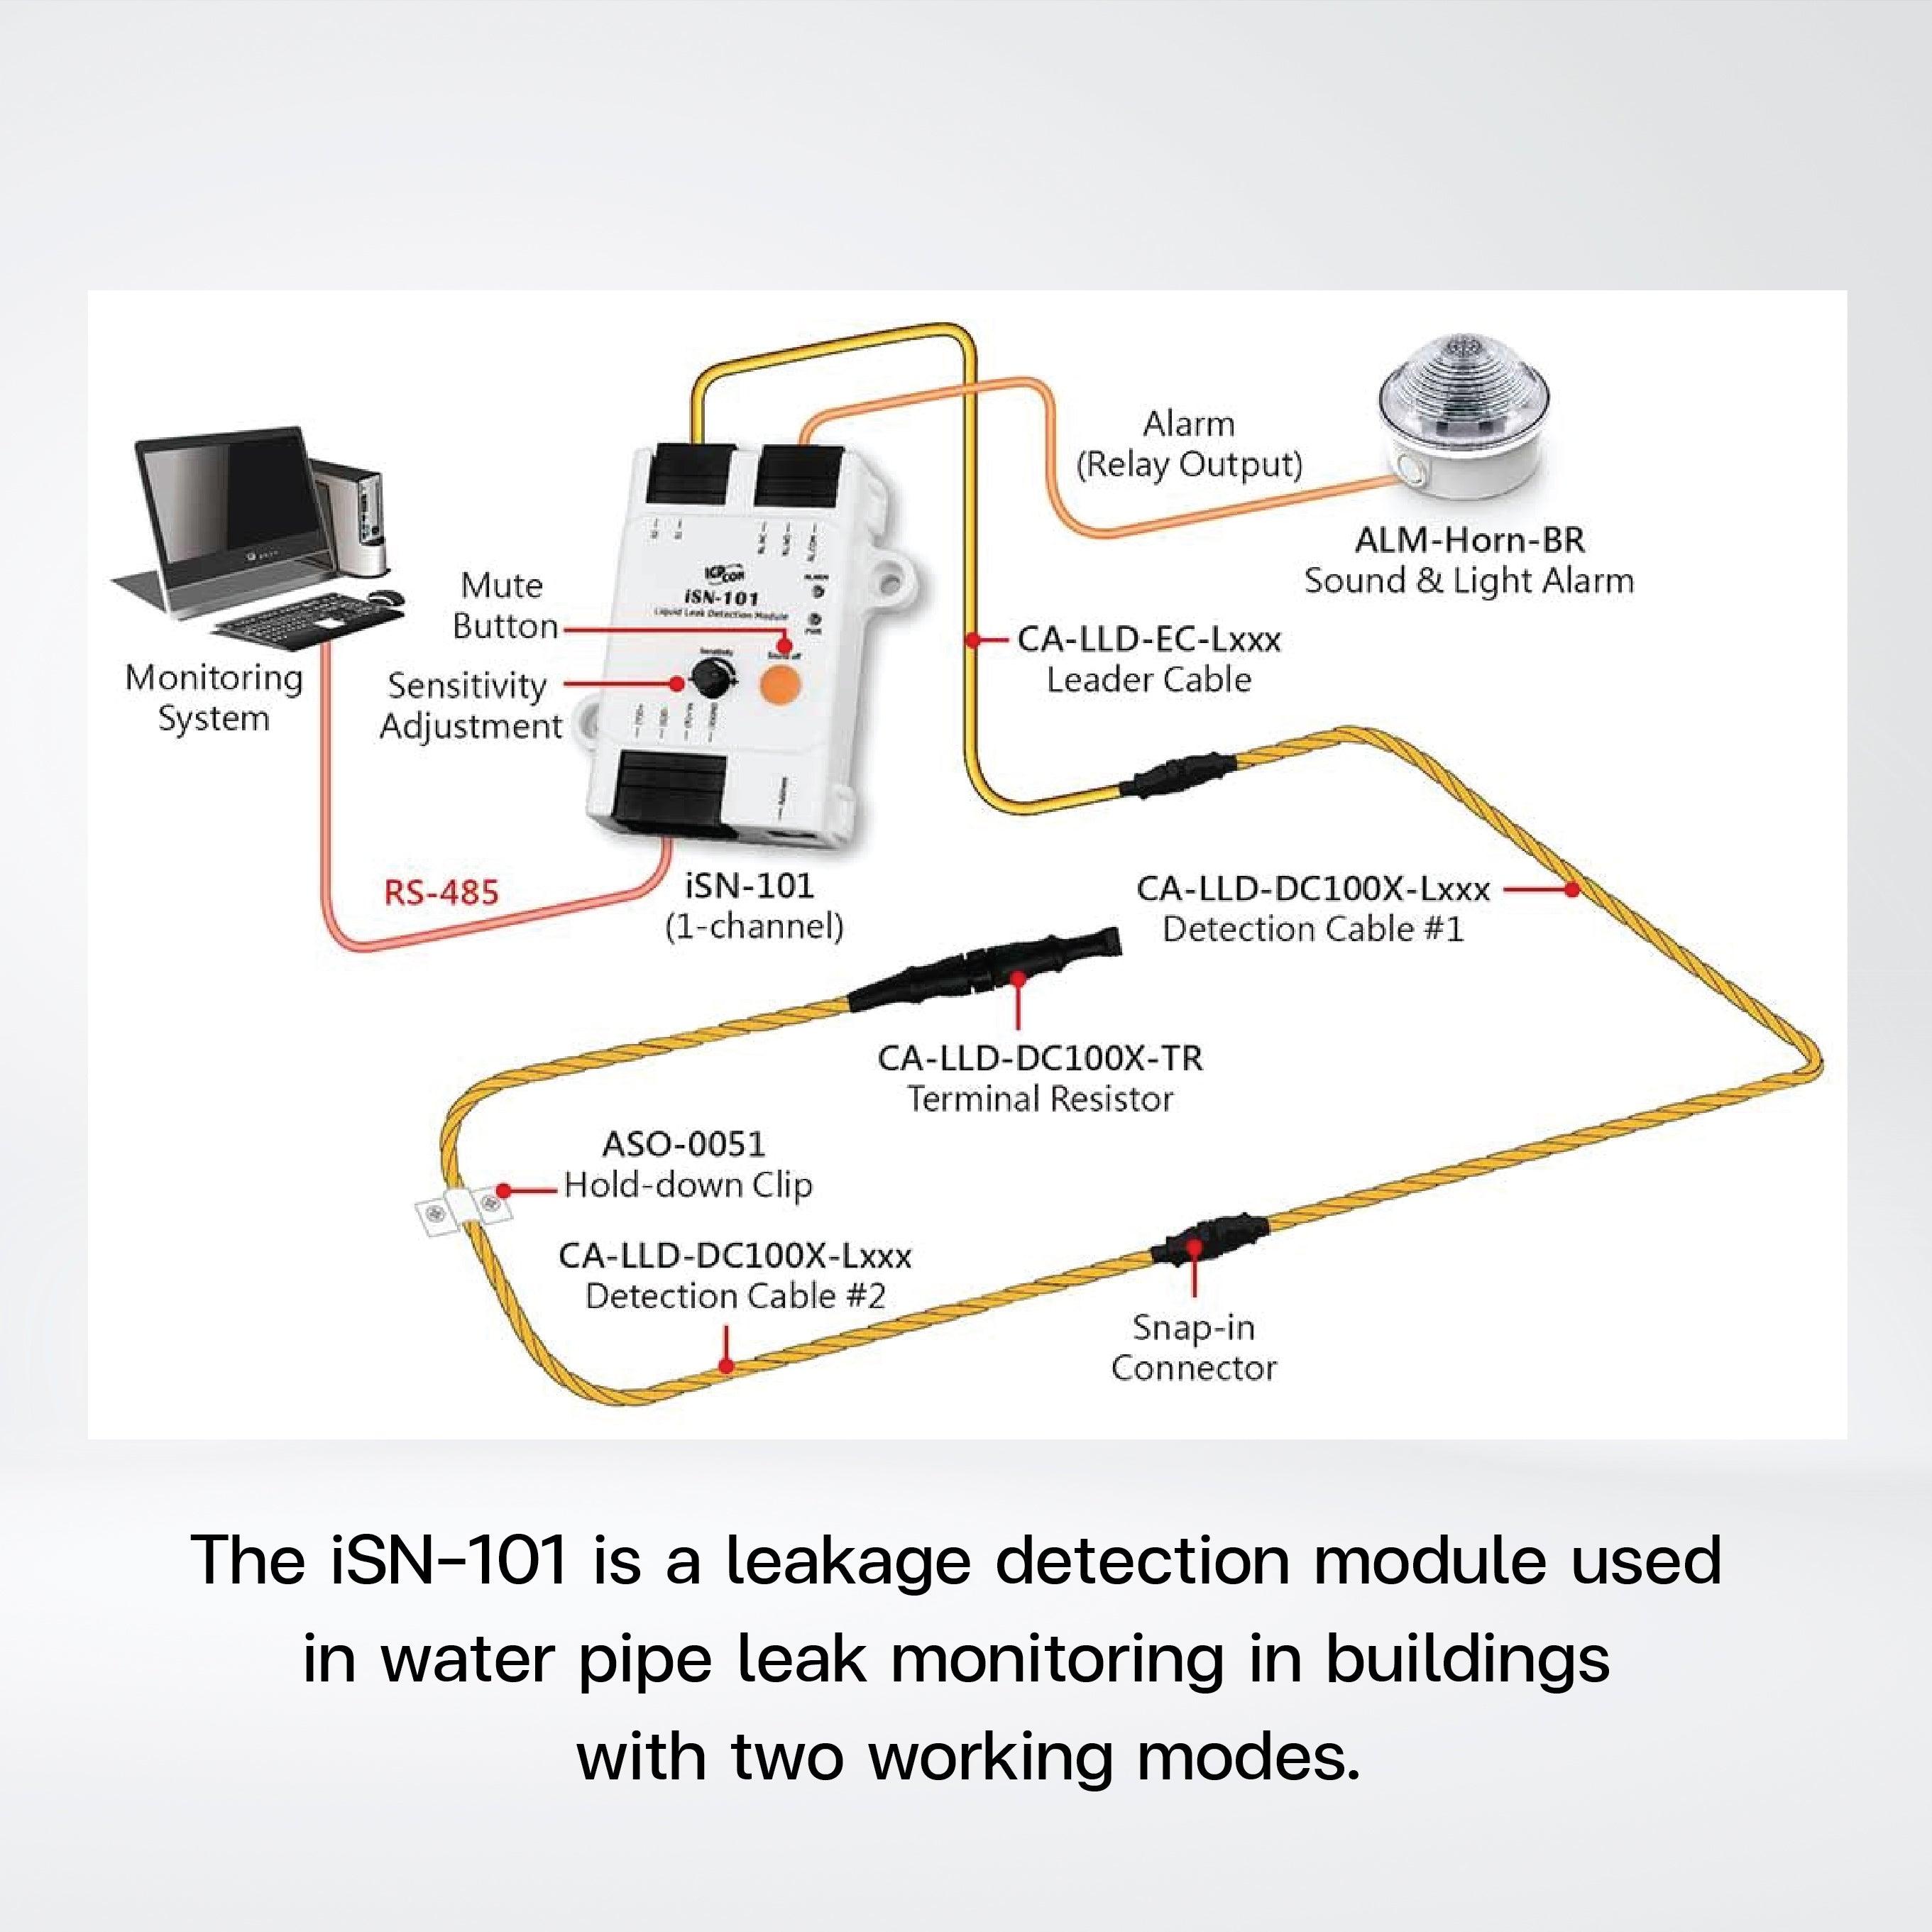 iSN-101/S2 1-channel Liquid Leak Detection Module with cables - Riverplus